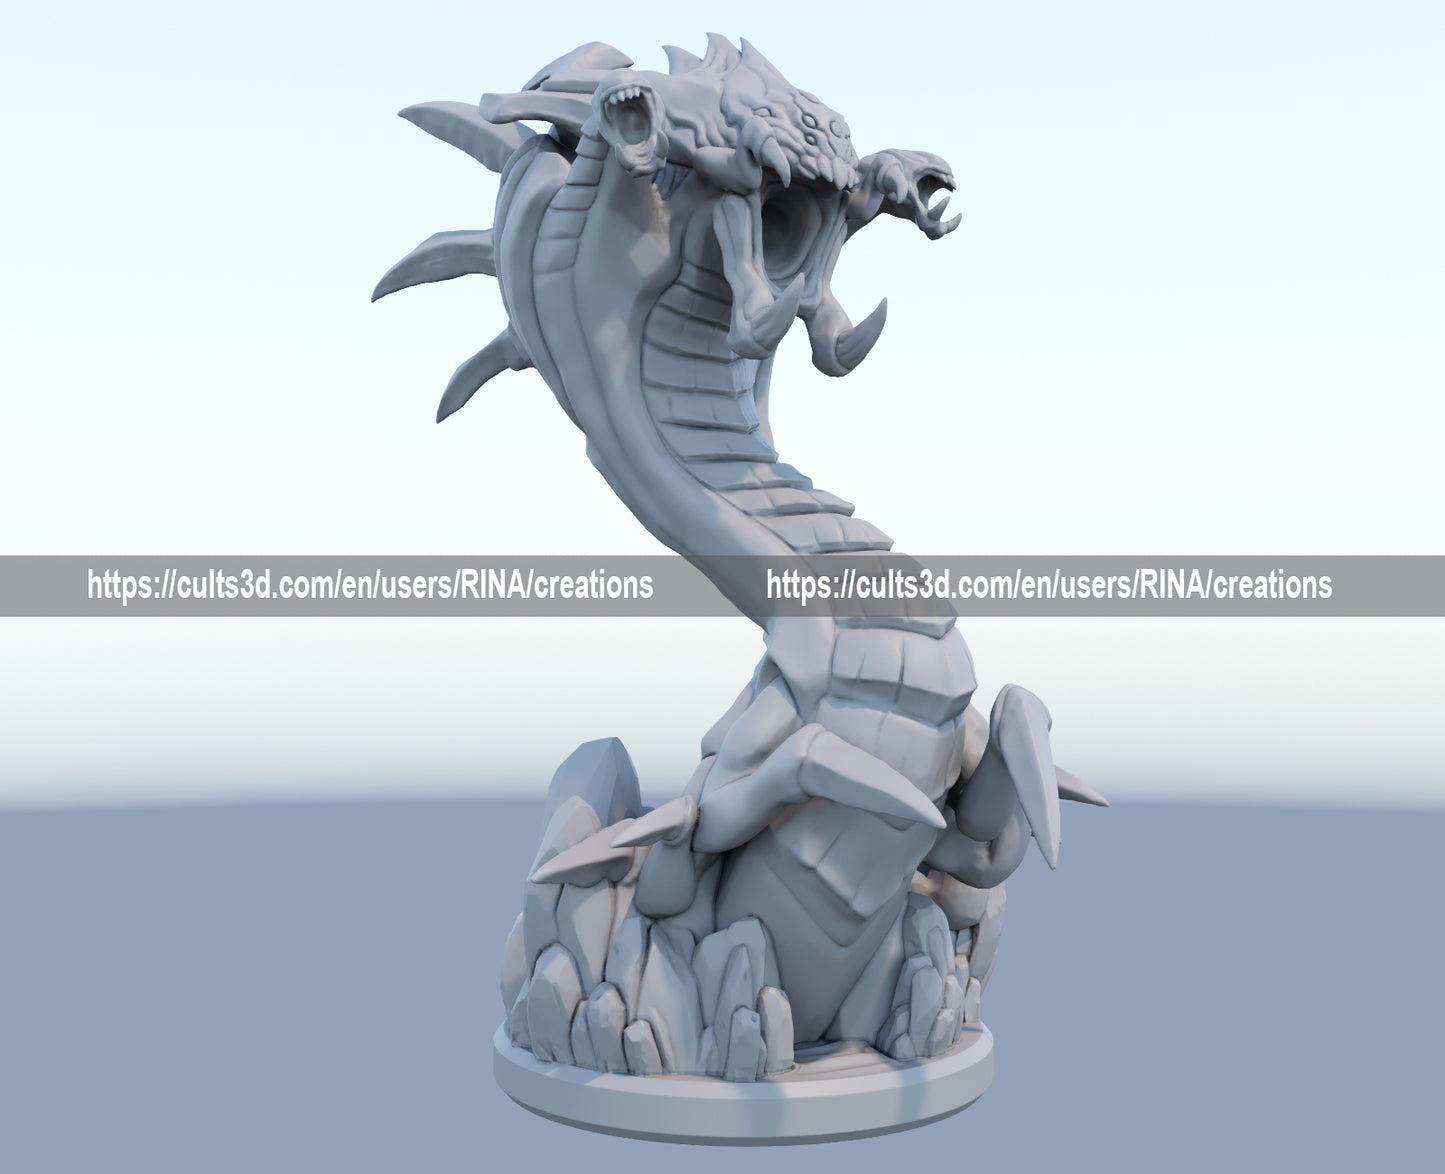 Baron Nashor 3D-printed League of Legends champion figure. Decorate your gaming setup or home with your favorite League of Legends champion! Choose between the unpainted version, perfect for you to paint yourself, or the hand-painted version by a professional painter. Order your figure today!